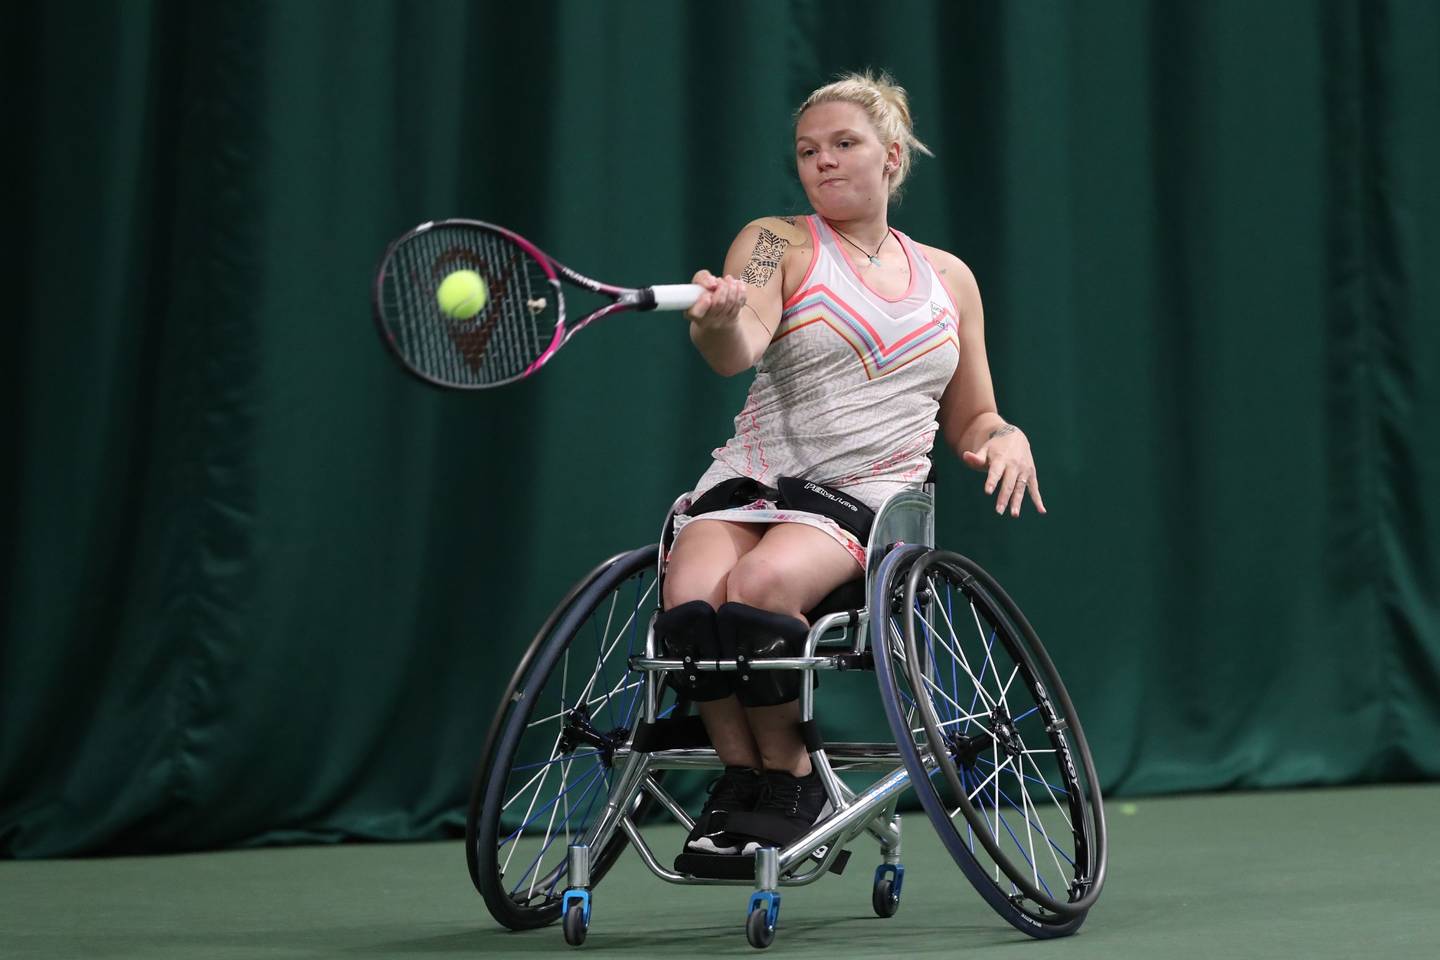 Jordanne Whiley on court playing forehand shot 